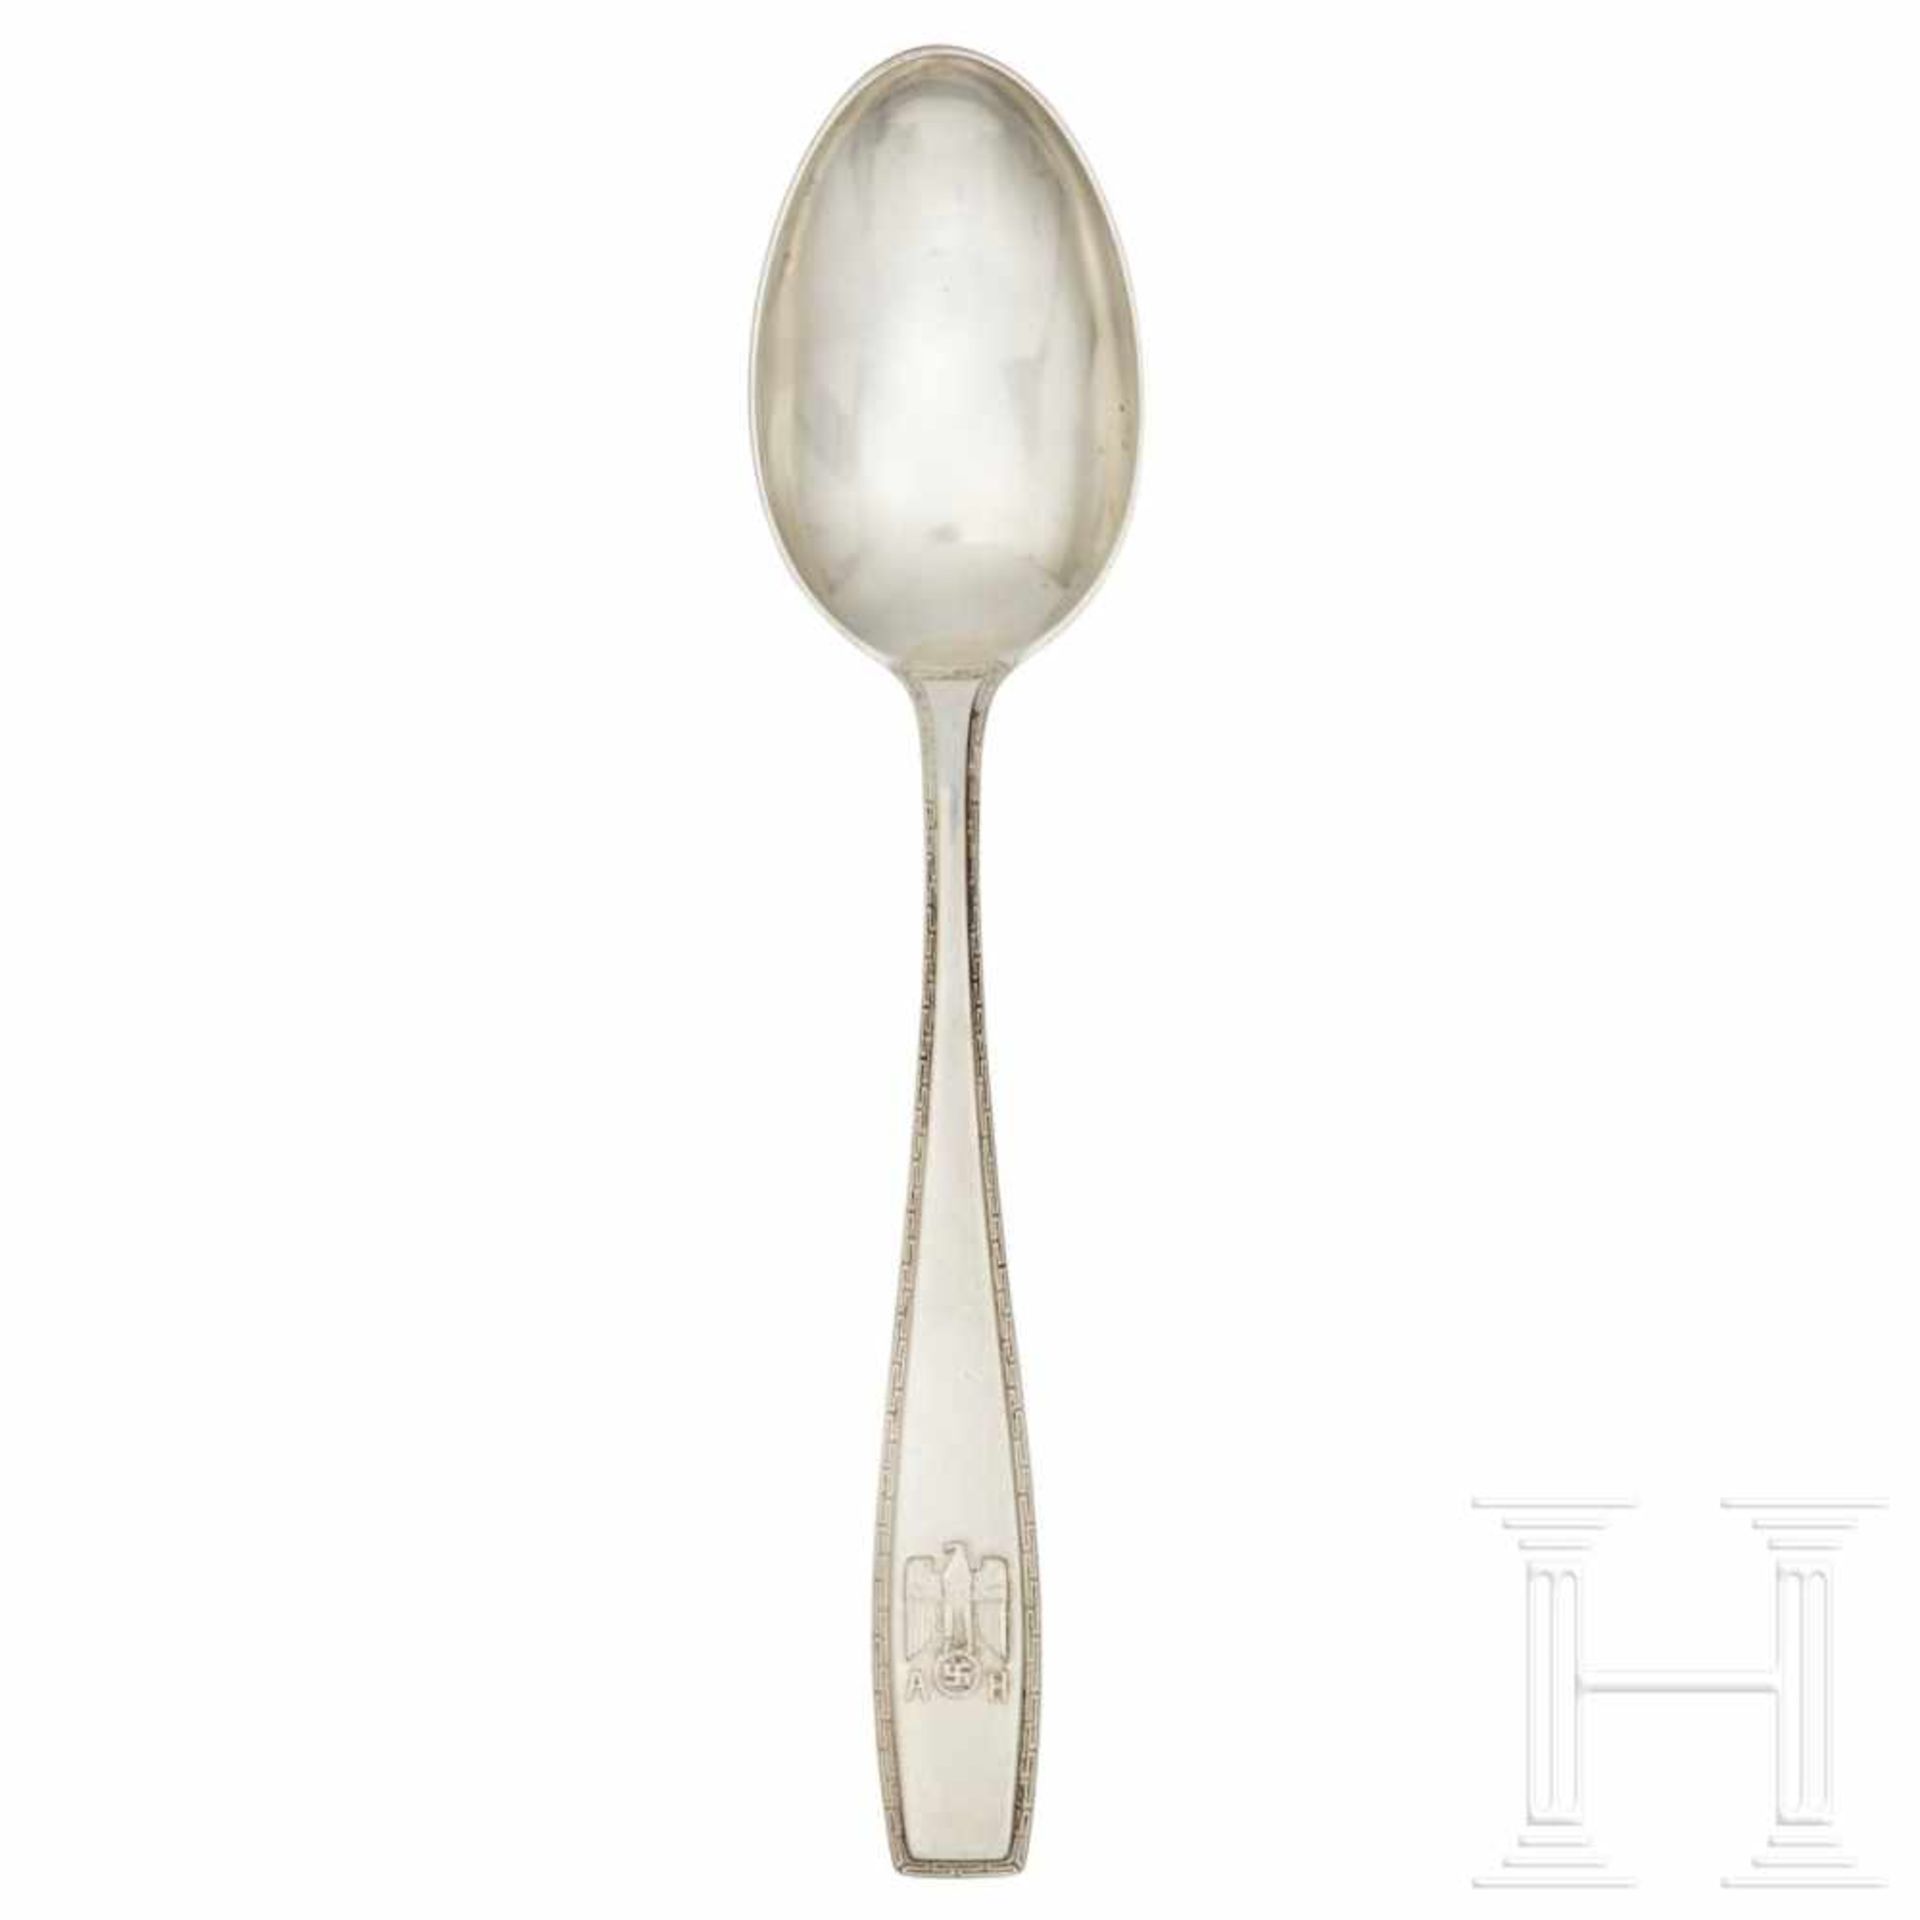 Adolf Hitler – a Serving Spoon from his Personal Silver ServiceSo called “formal pattern” with